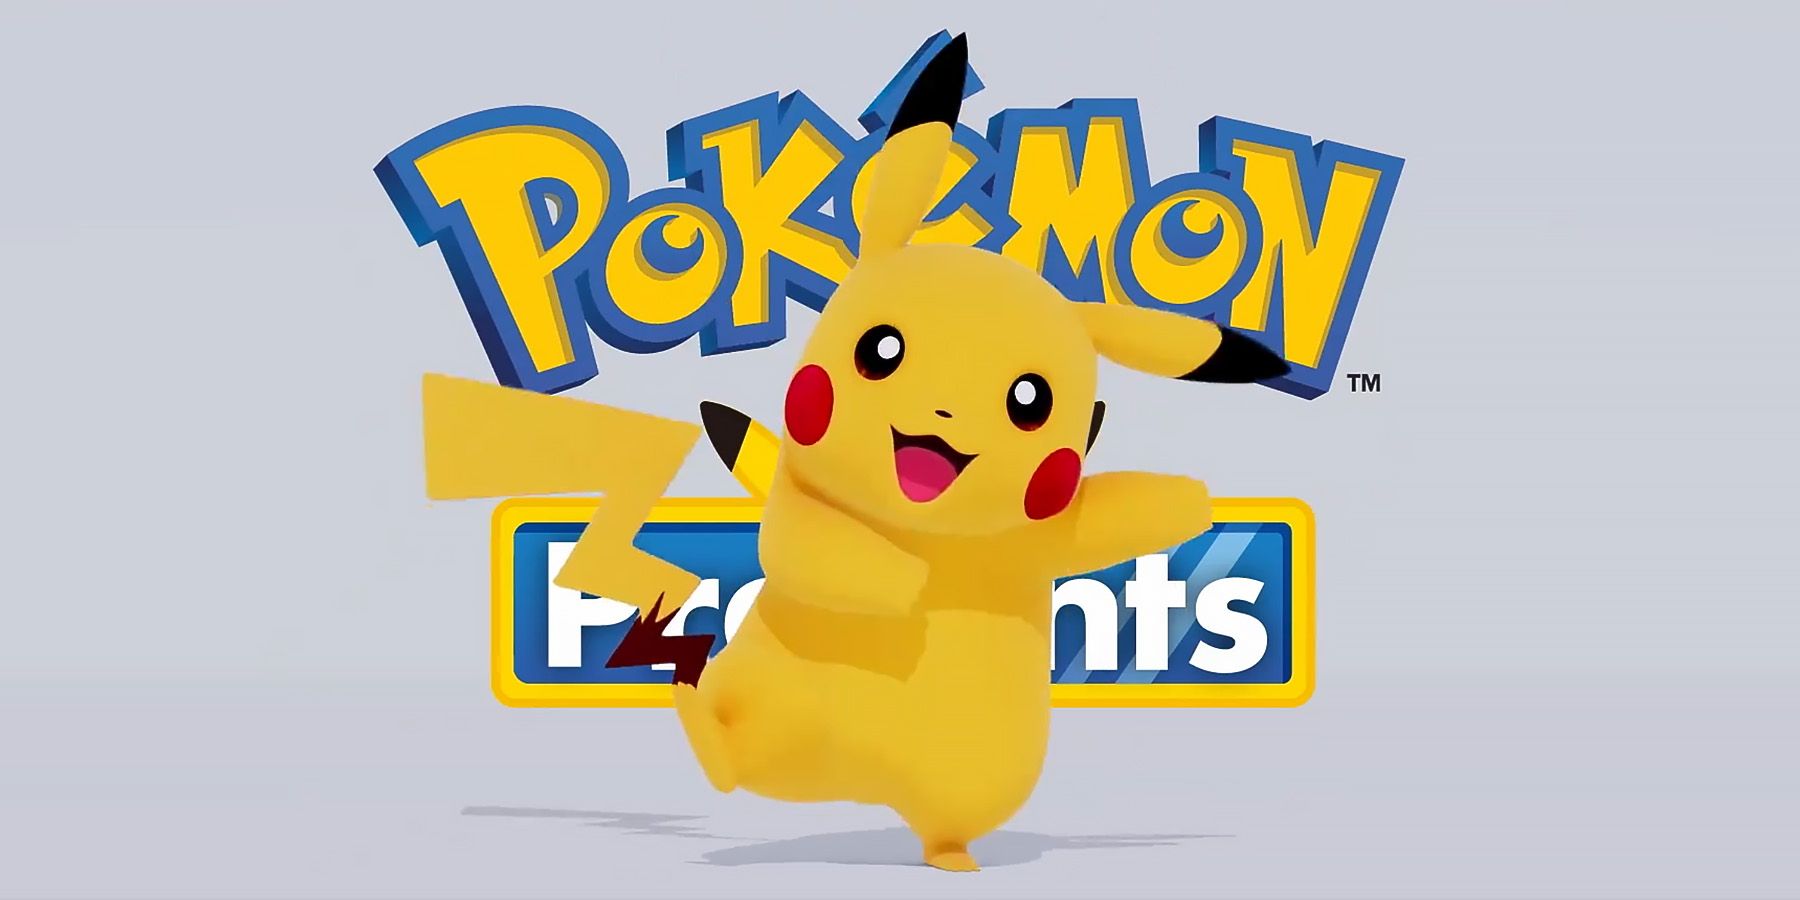 Pikachu in front of Pokemon Presents logo on gray background